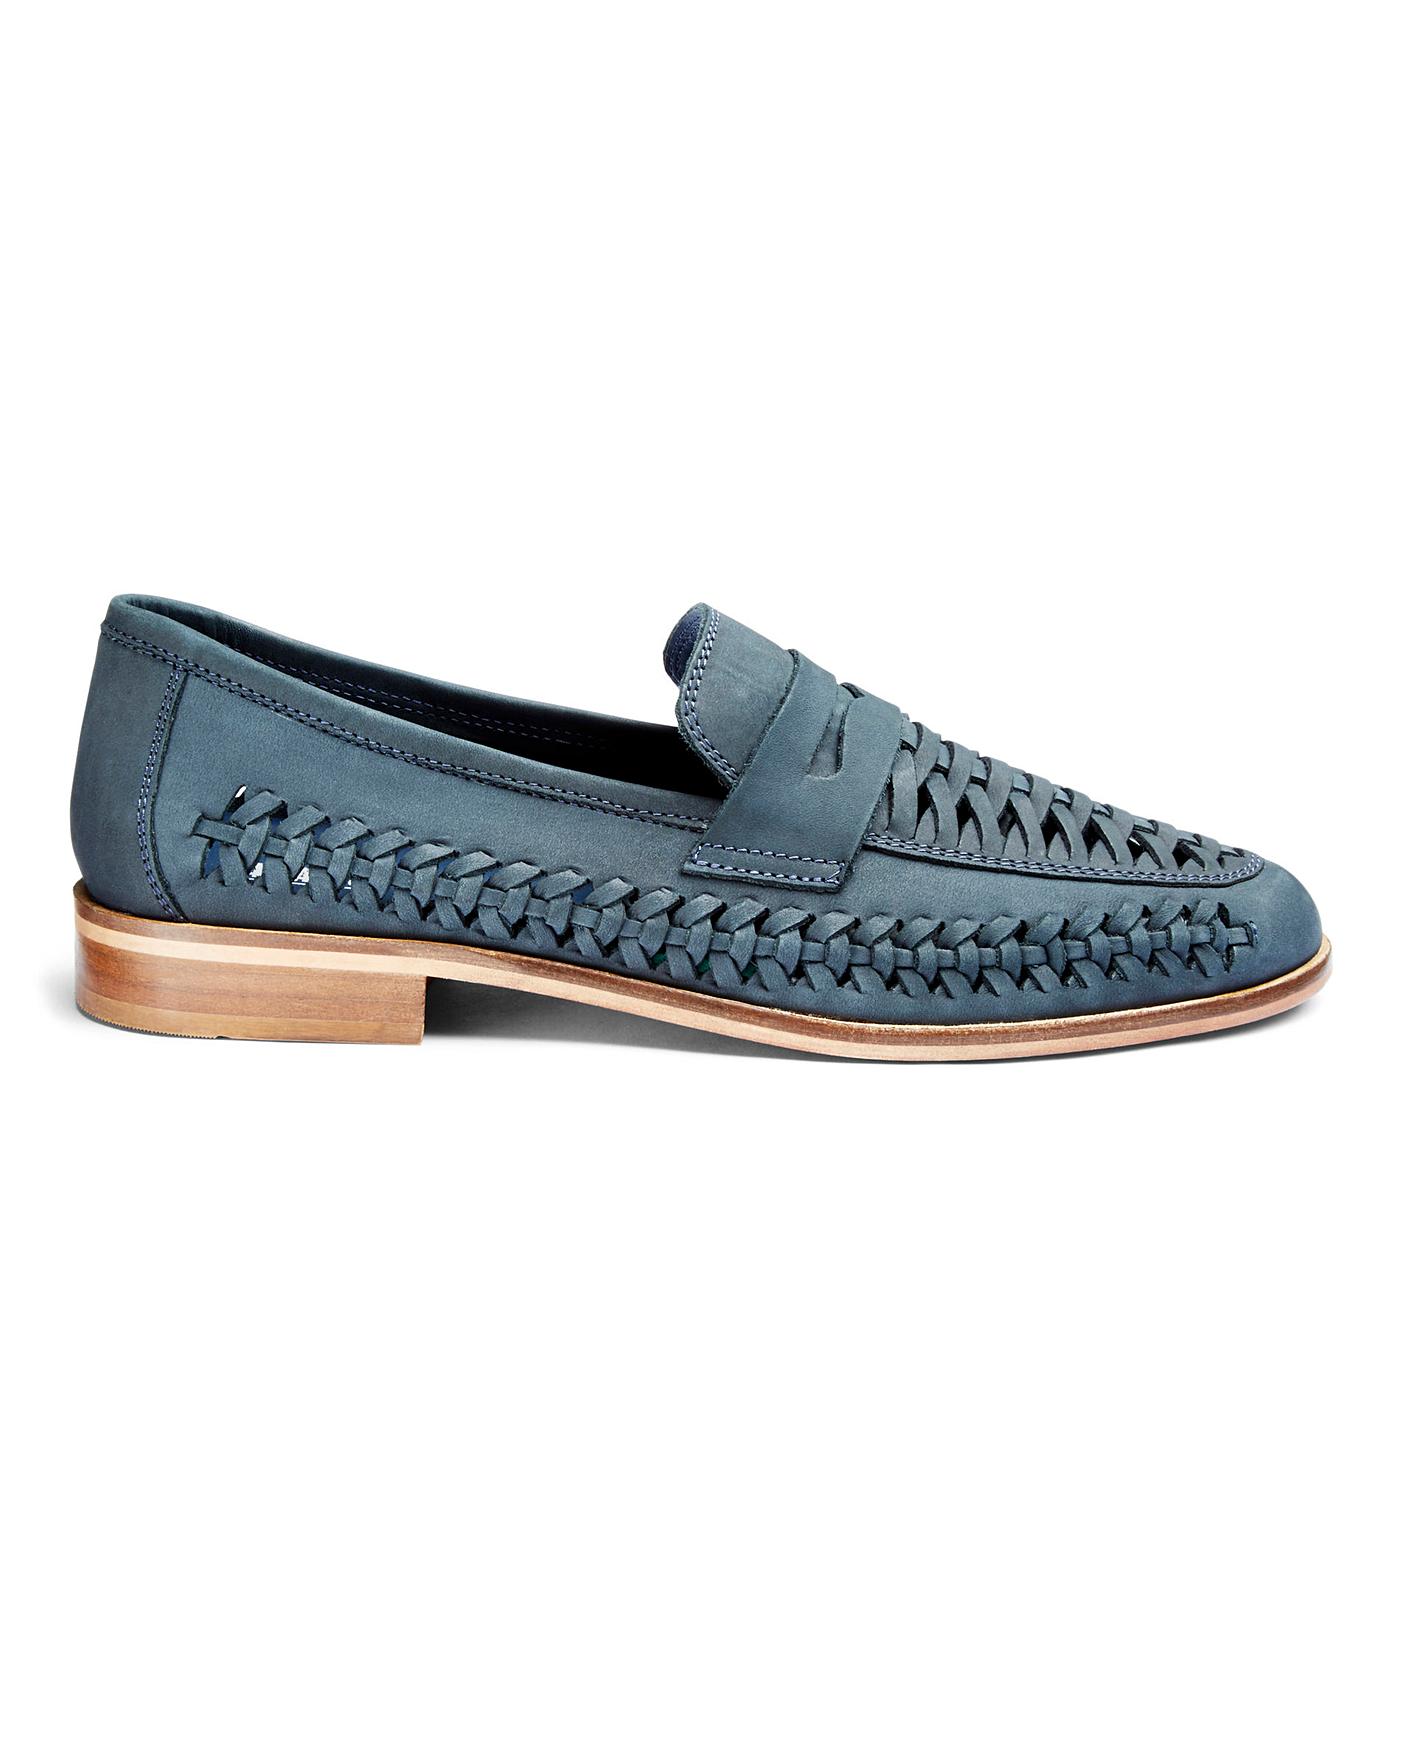 Leather Interweave Loafer